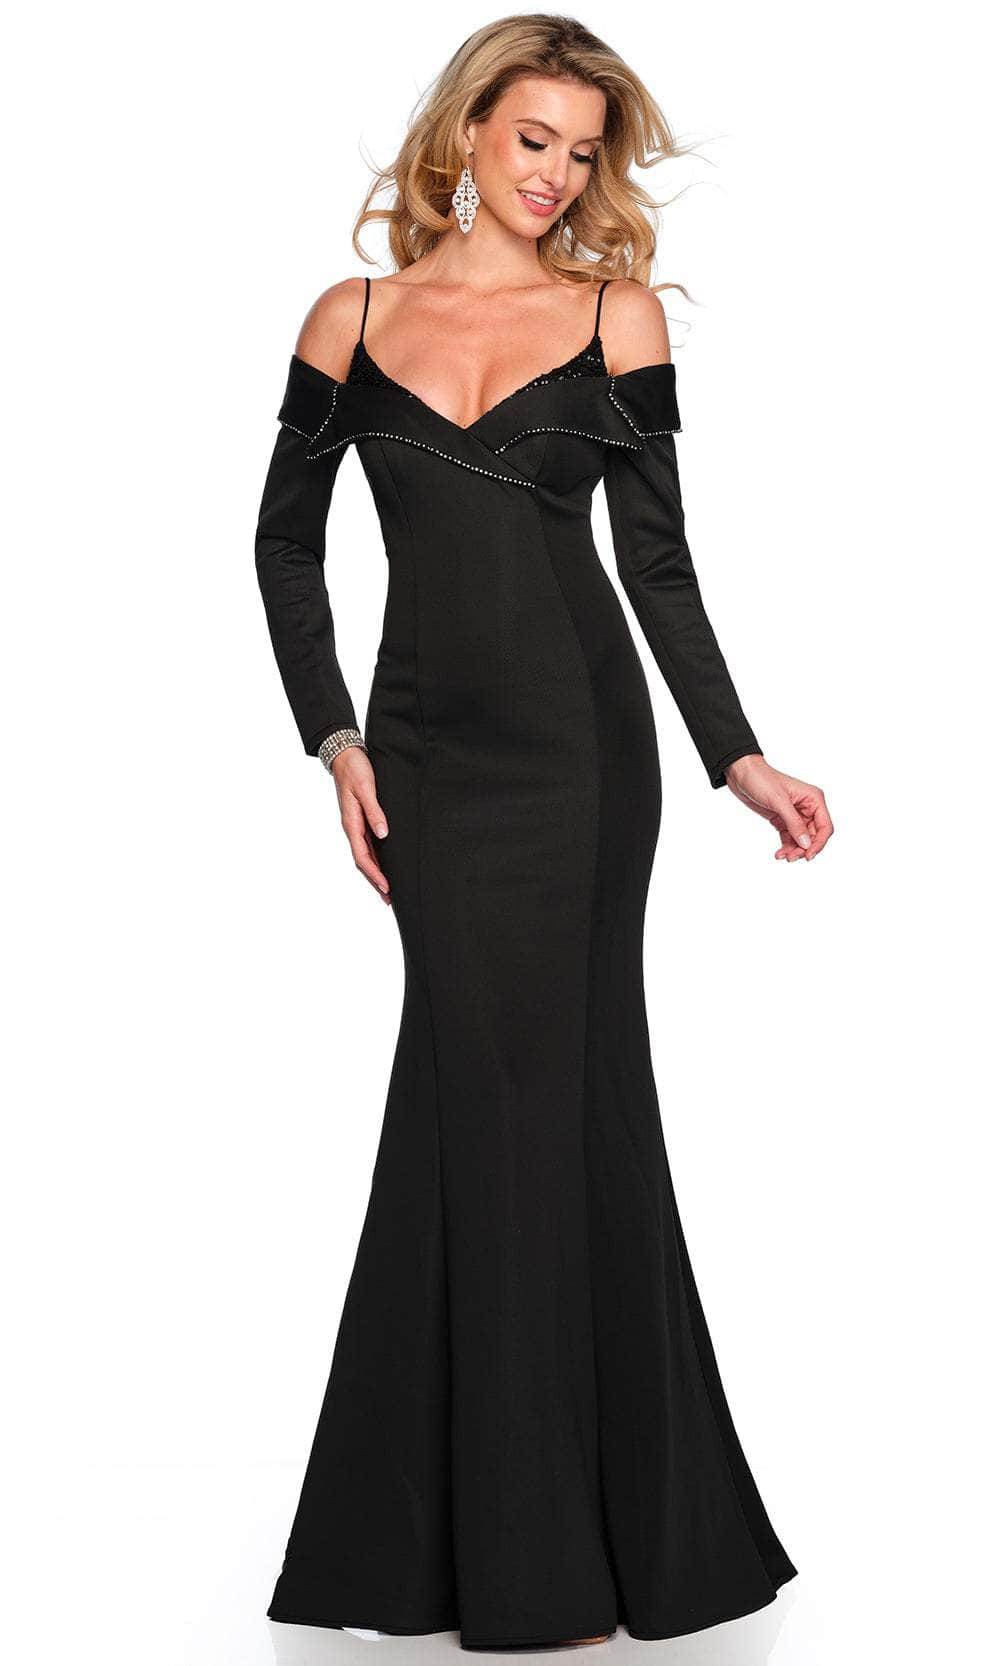 Dave & Johnny 11434 - Long Sleeve Cold Shoulder Evening Gown
